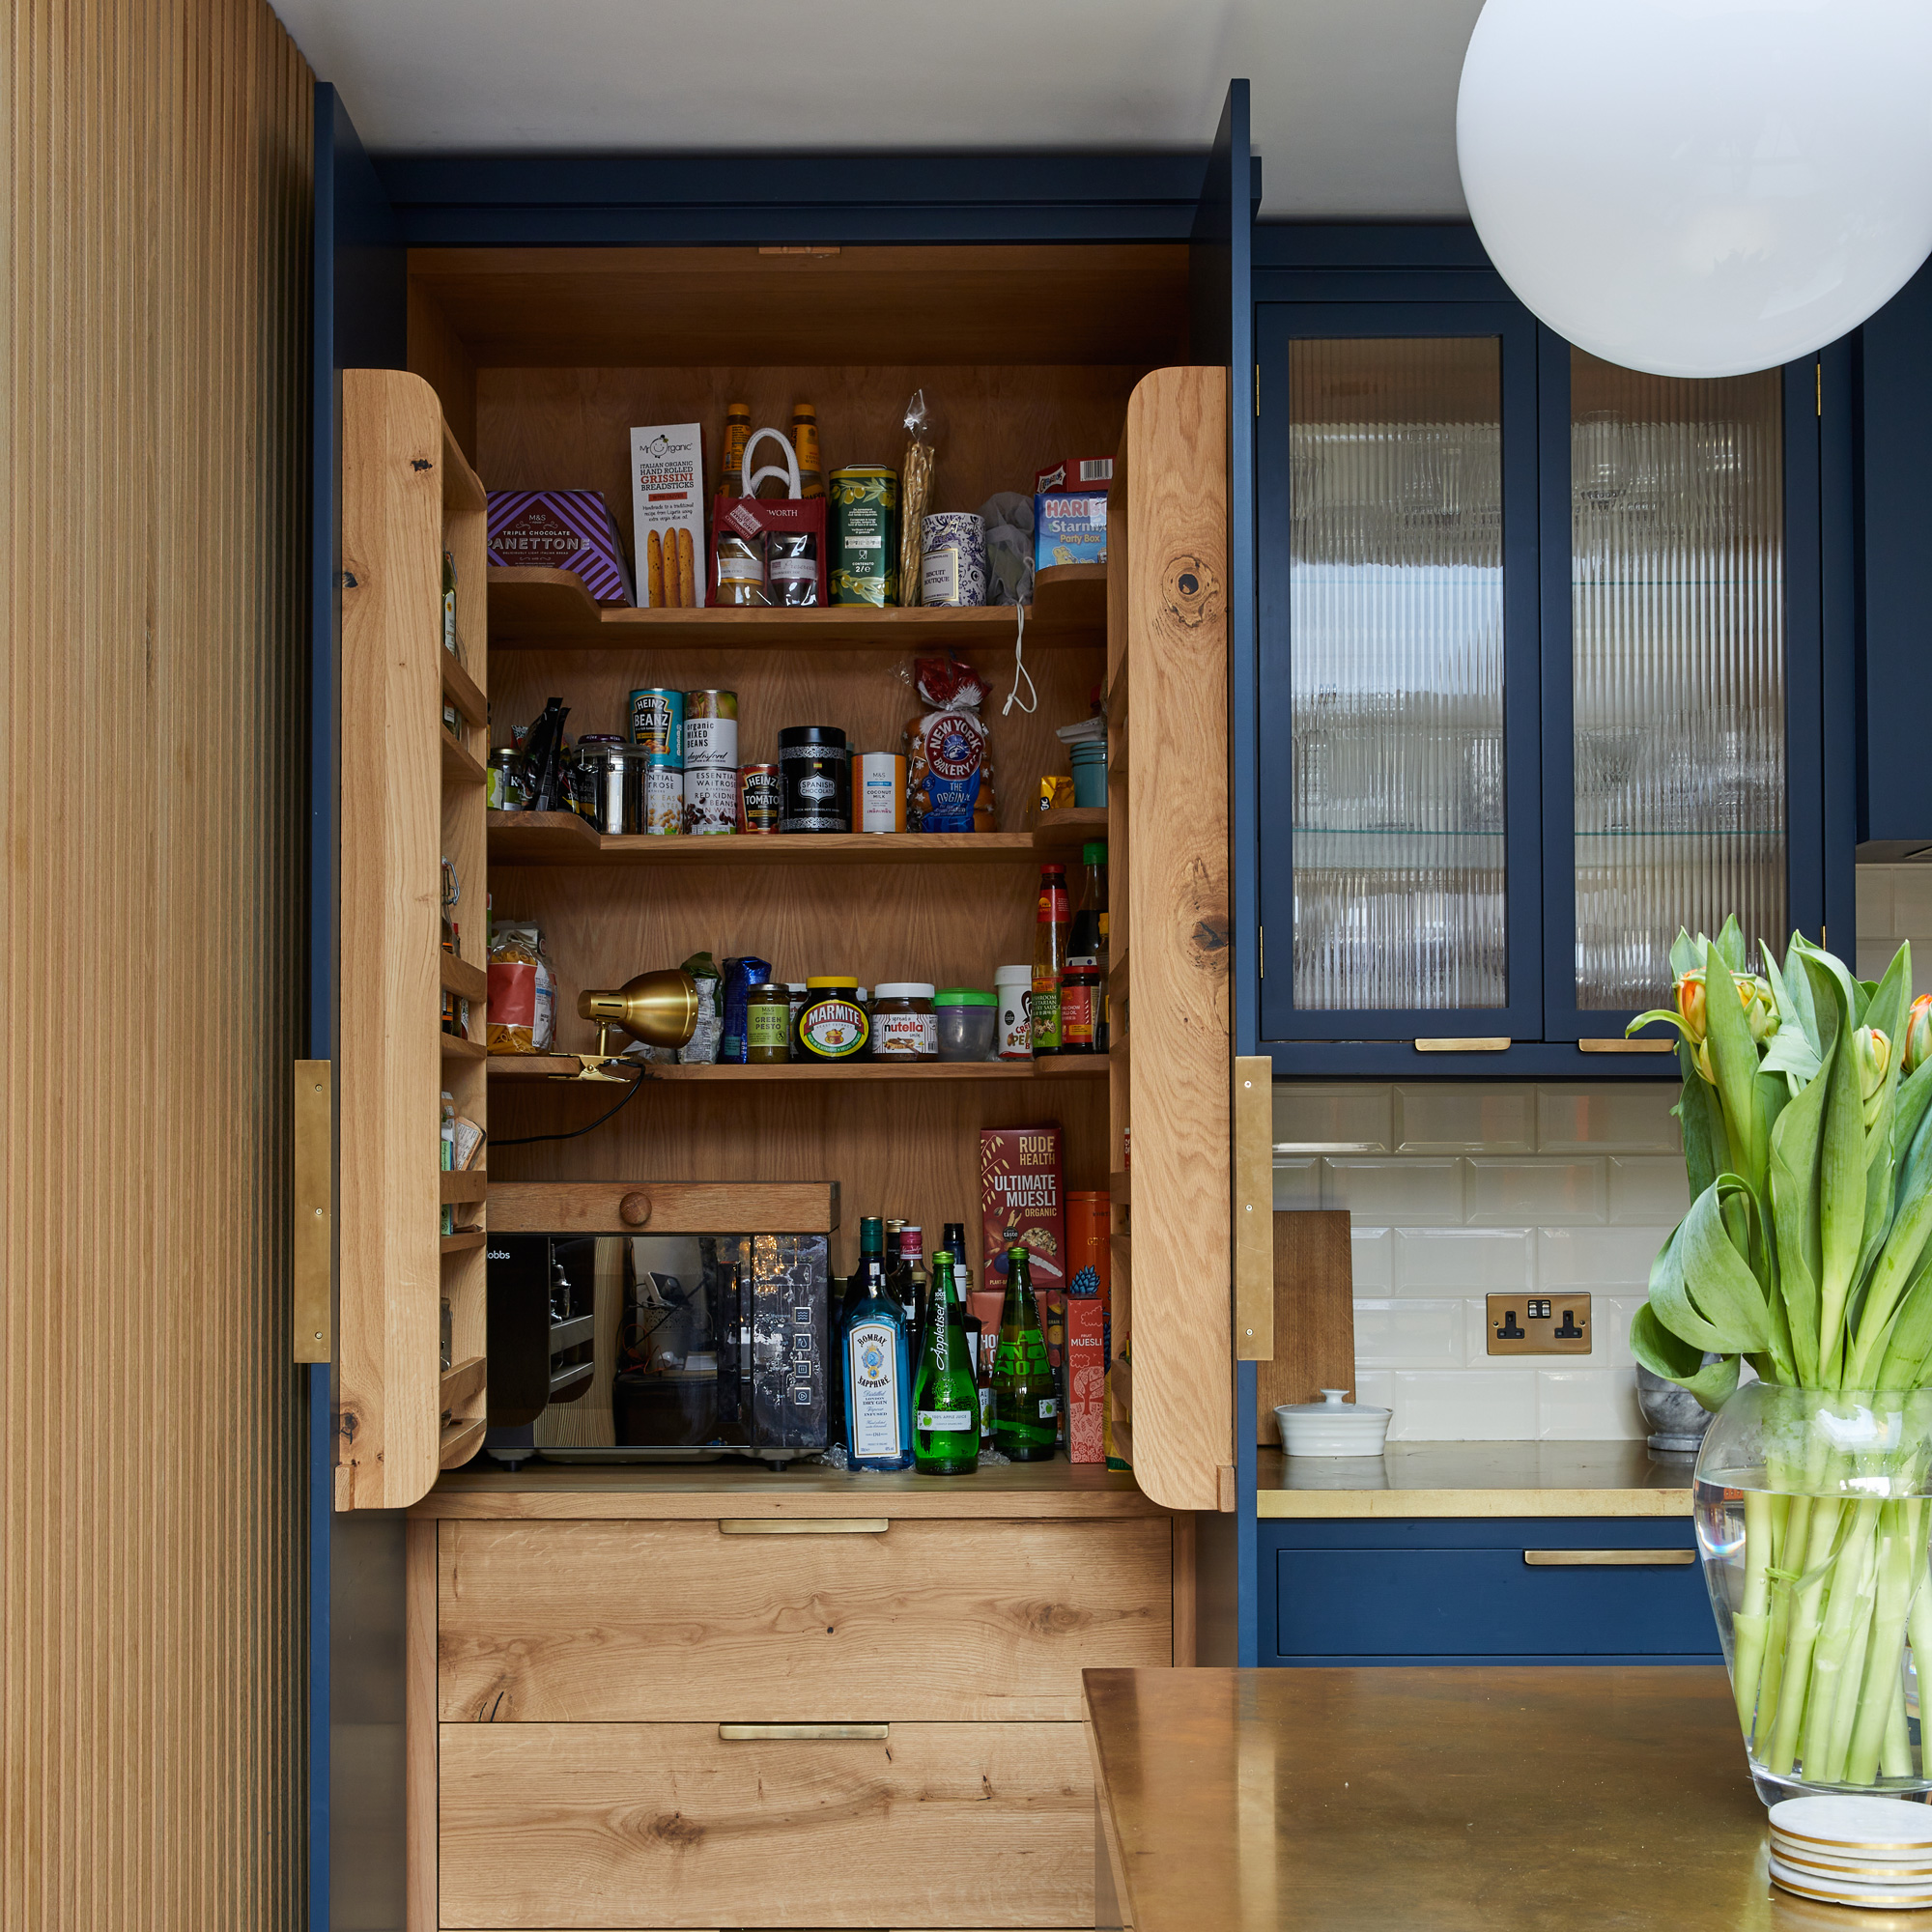 a stylis kitchen pantry with shelving at the top and drawers underneath